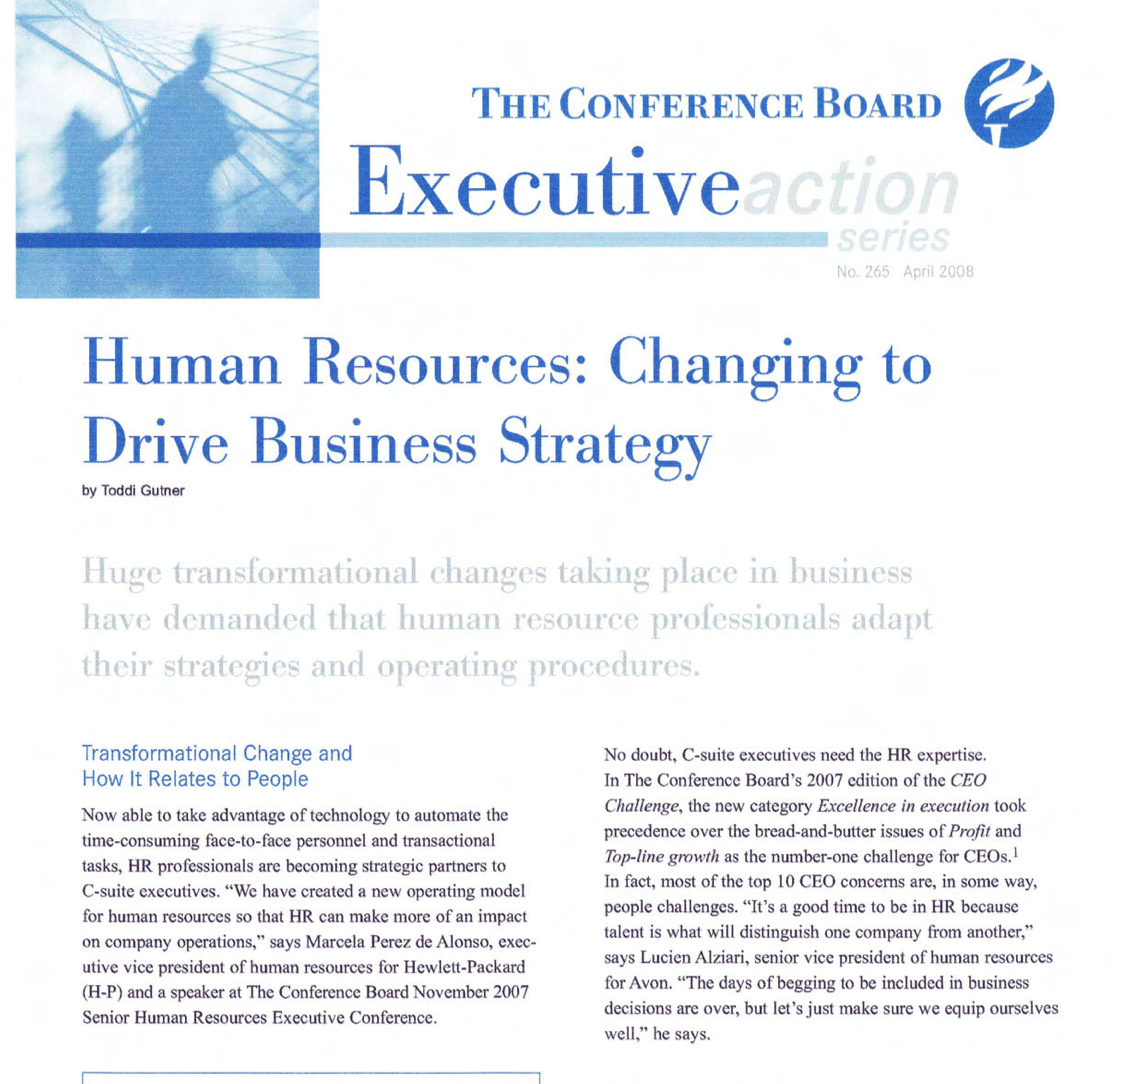 Human resources: changing to drive business strategy